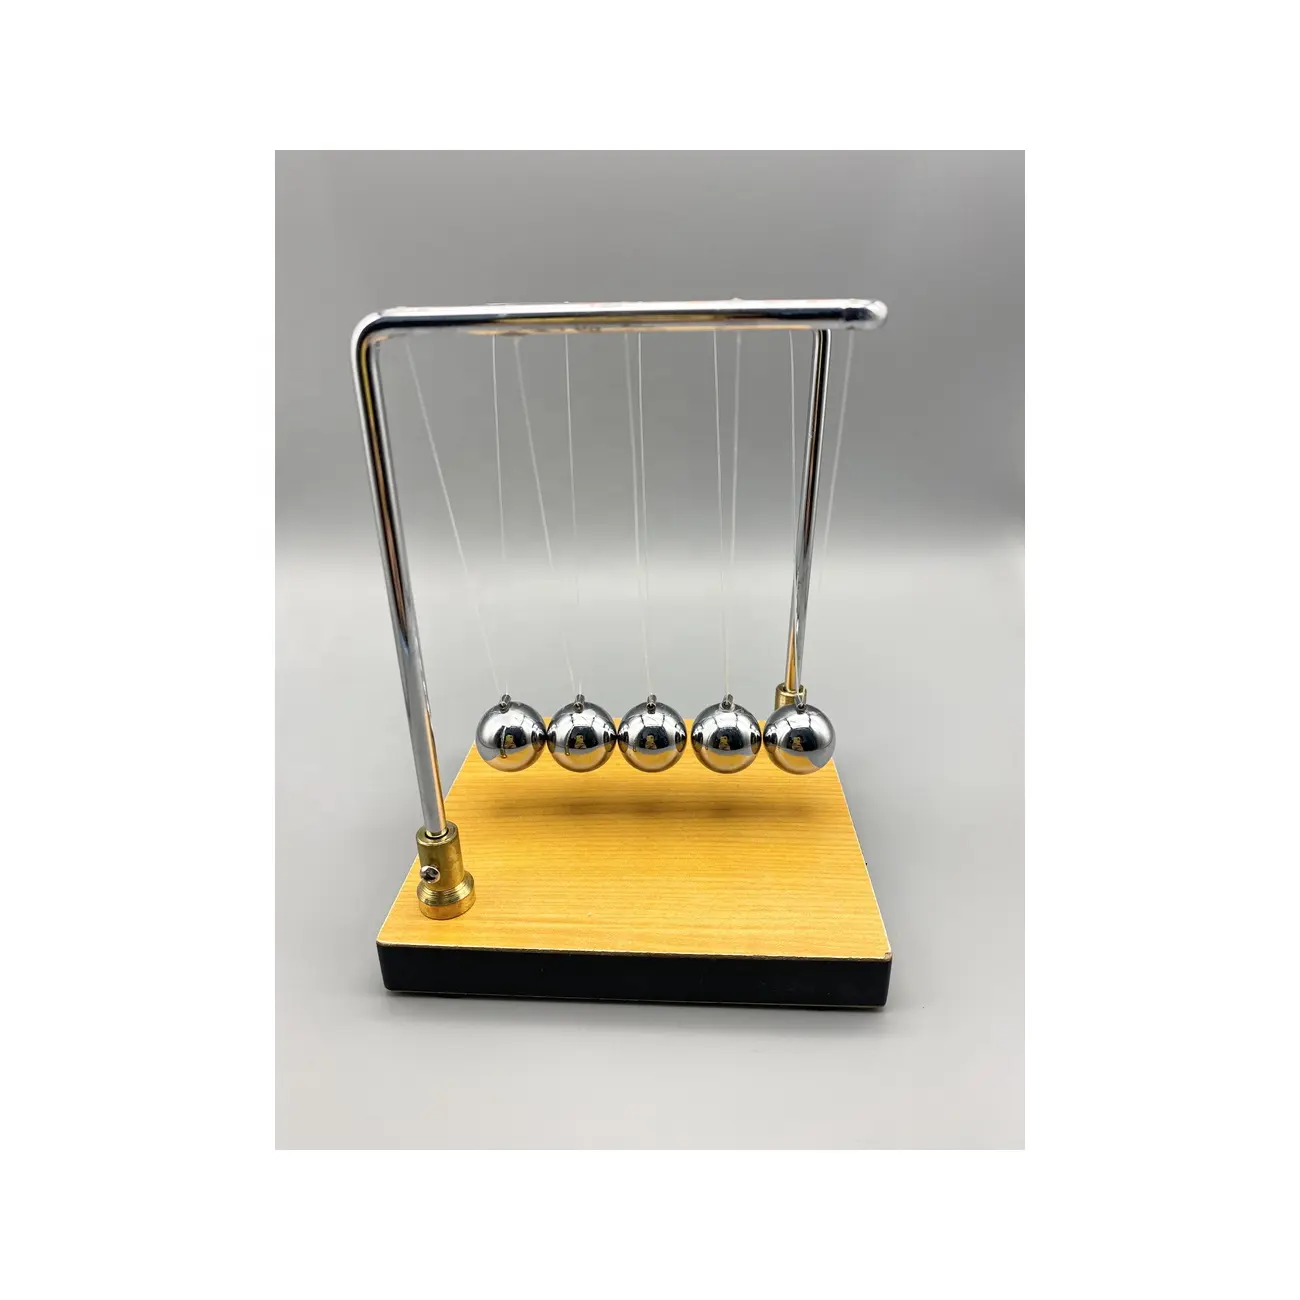 2022 new high-quality Newton's cradle balance ball scientific psychology puzzle table interesting Christmas gift gadget